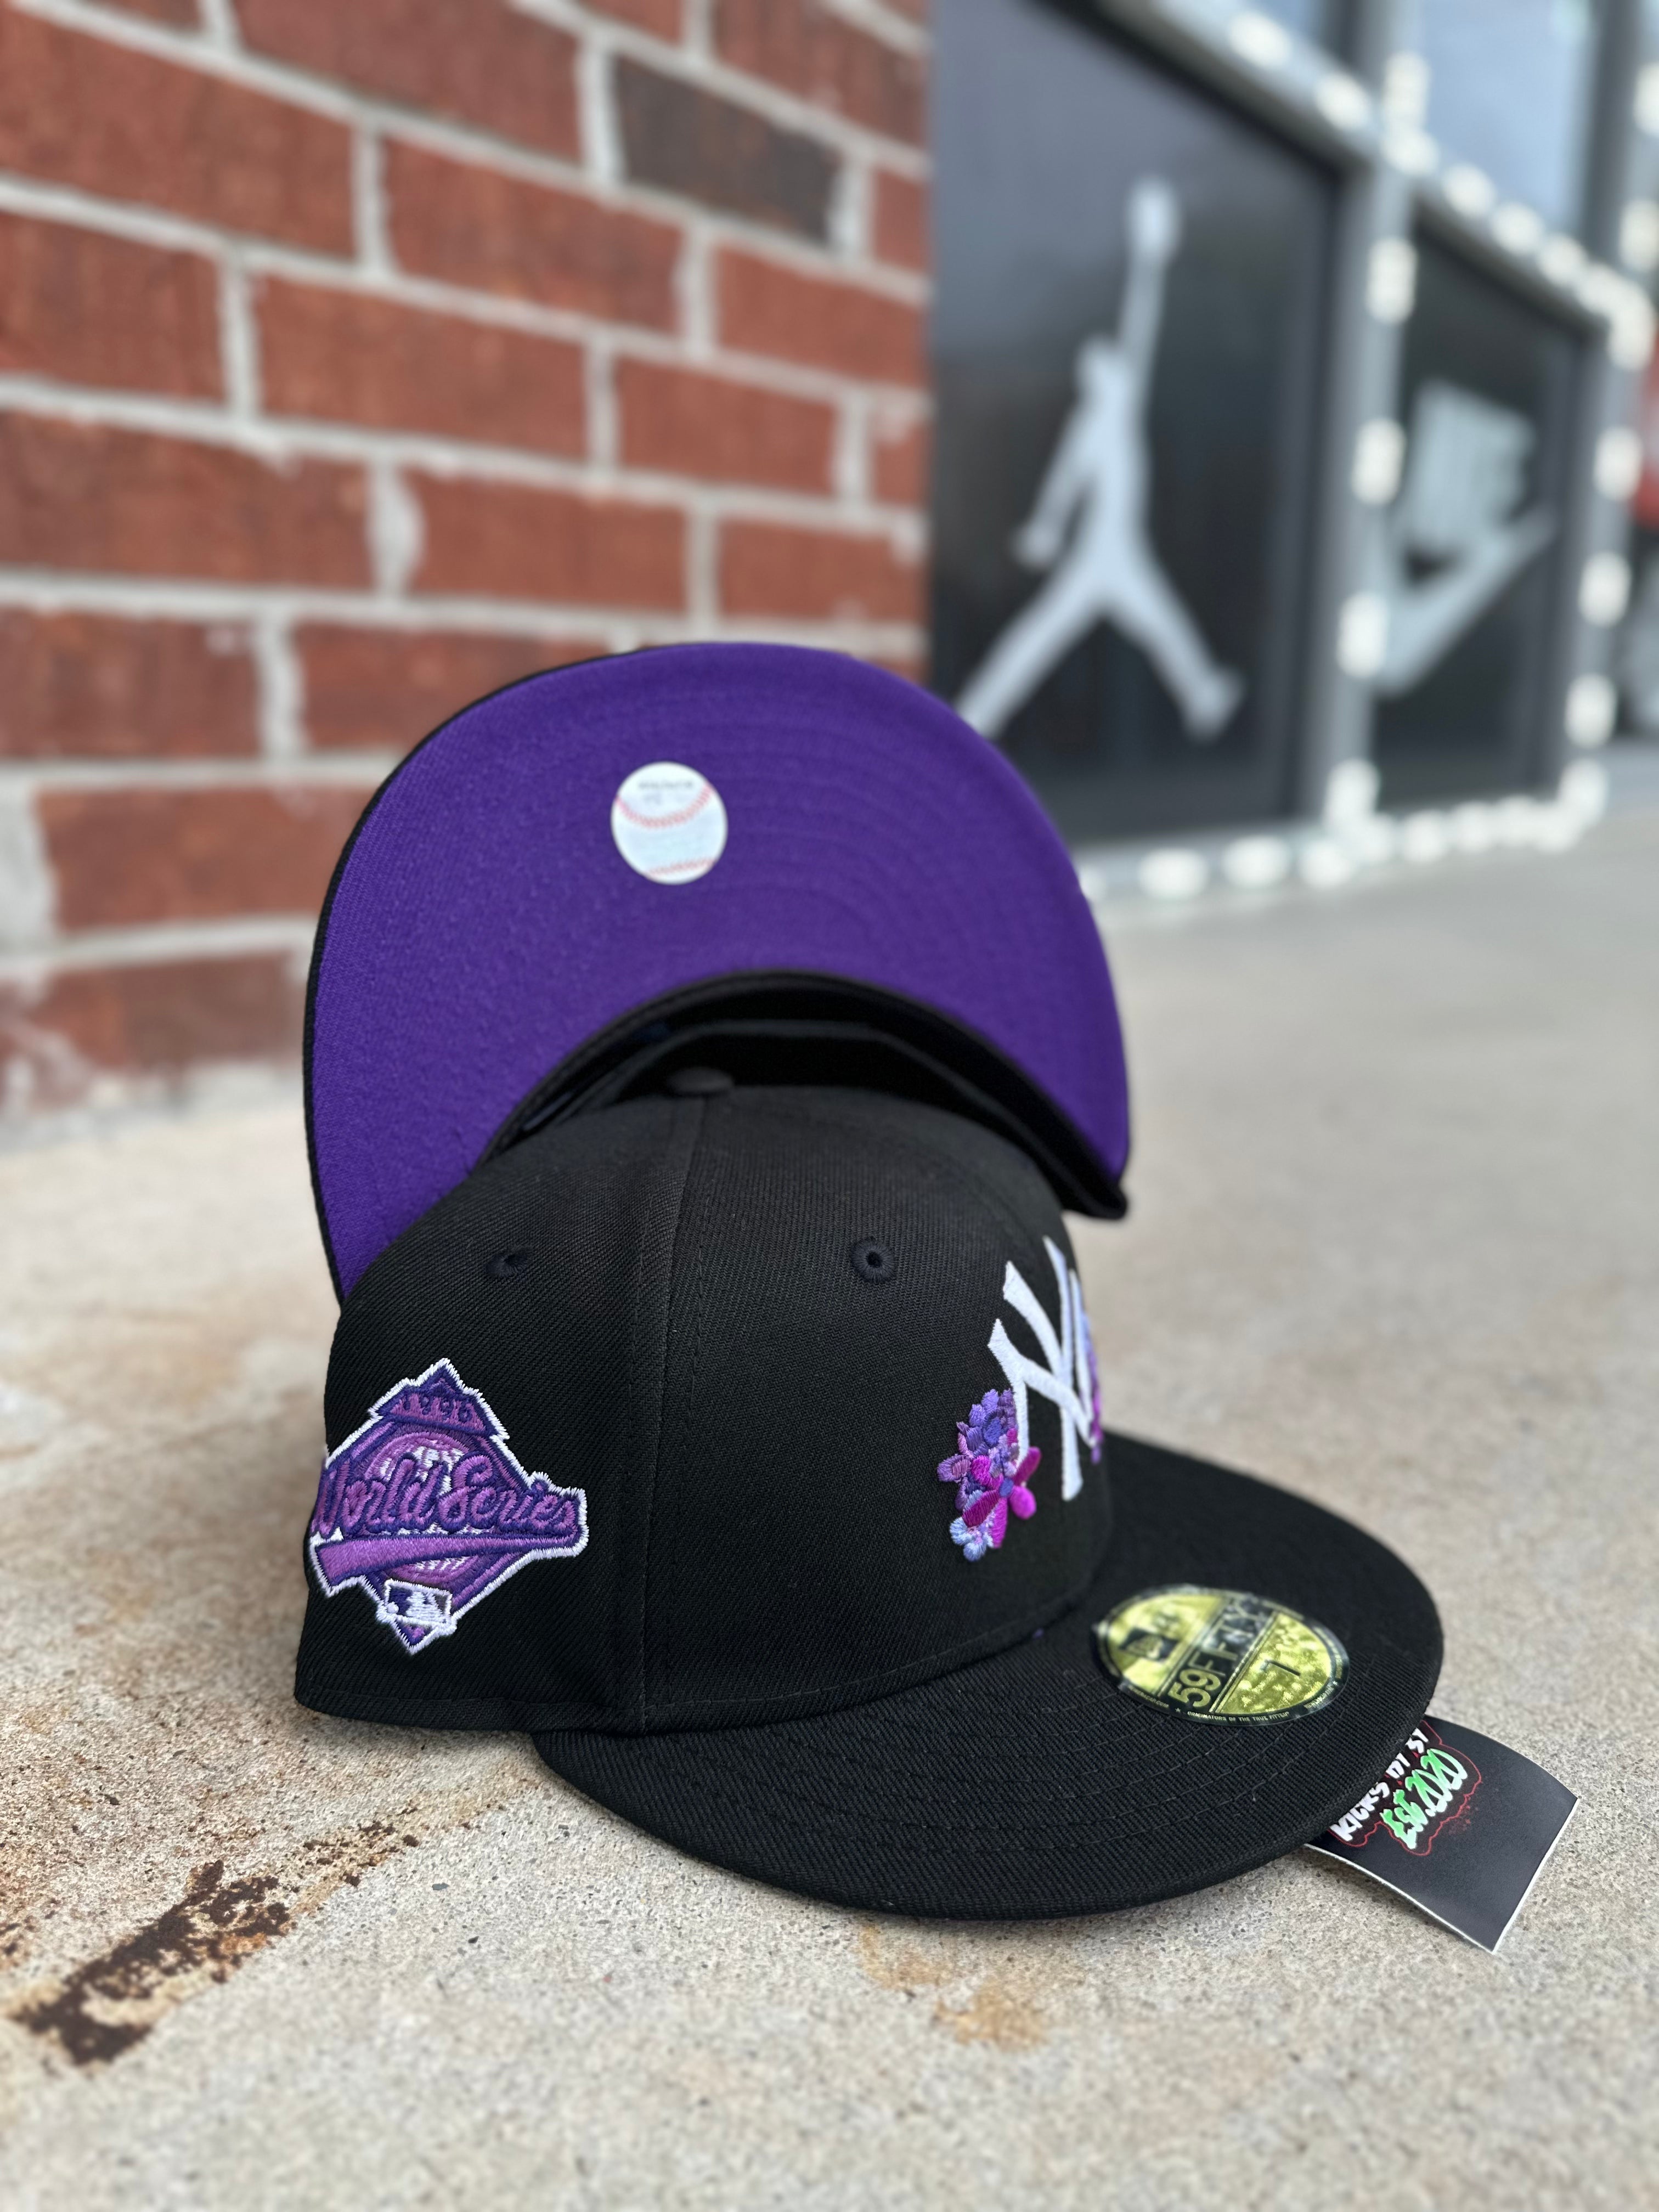 New Era 59 FIFTY Fitted "New York Yankees" 1996 Purple Flower World Series